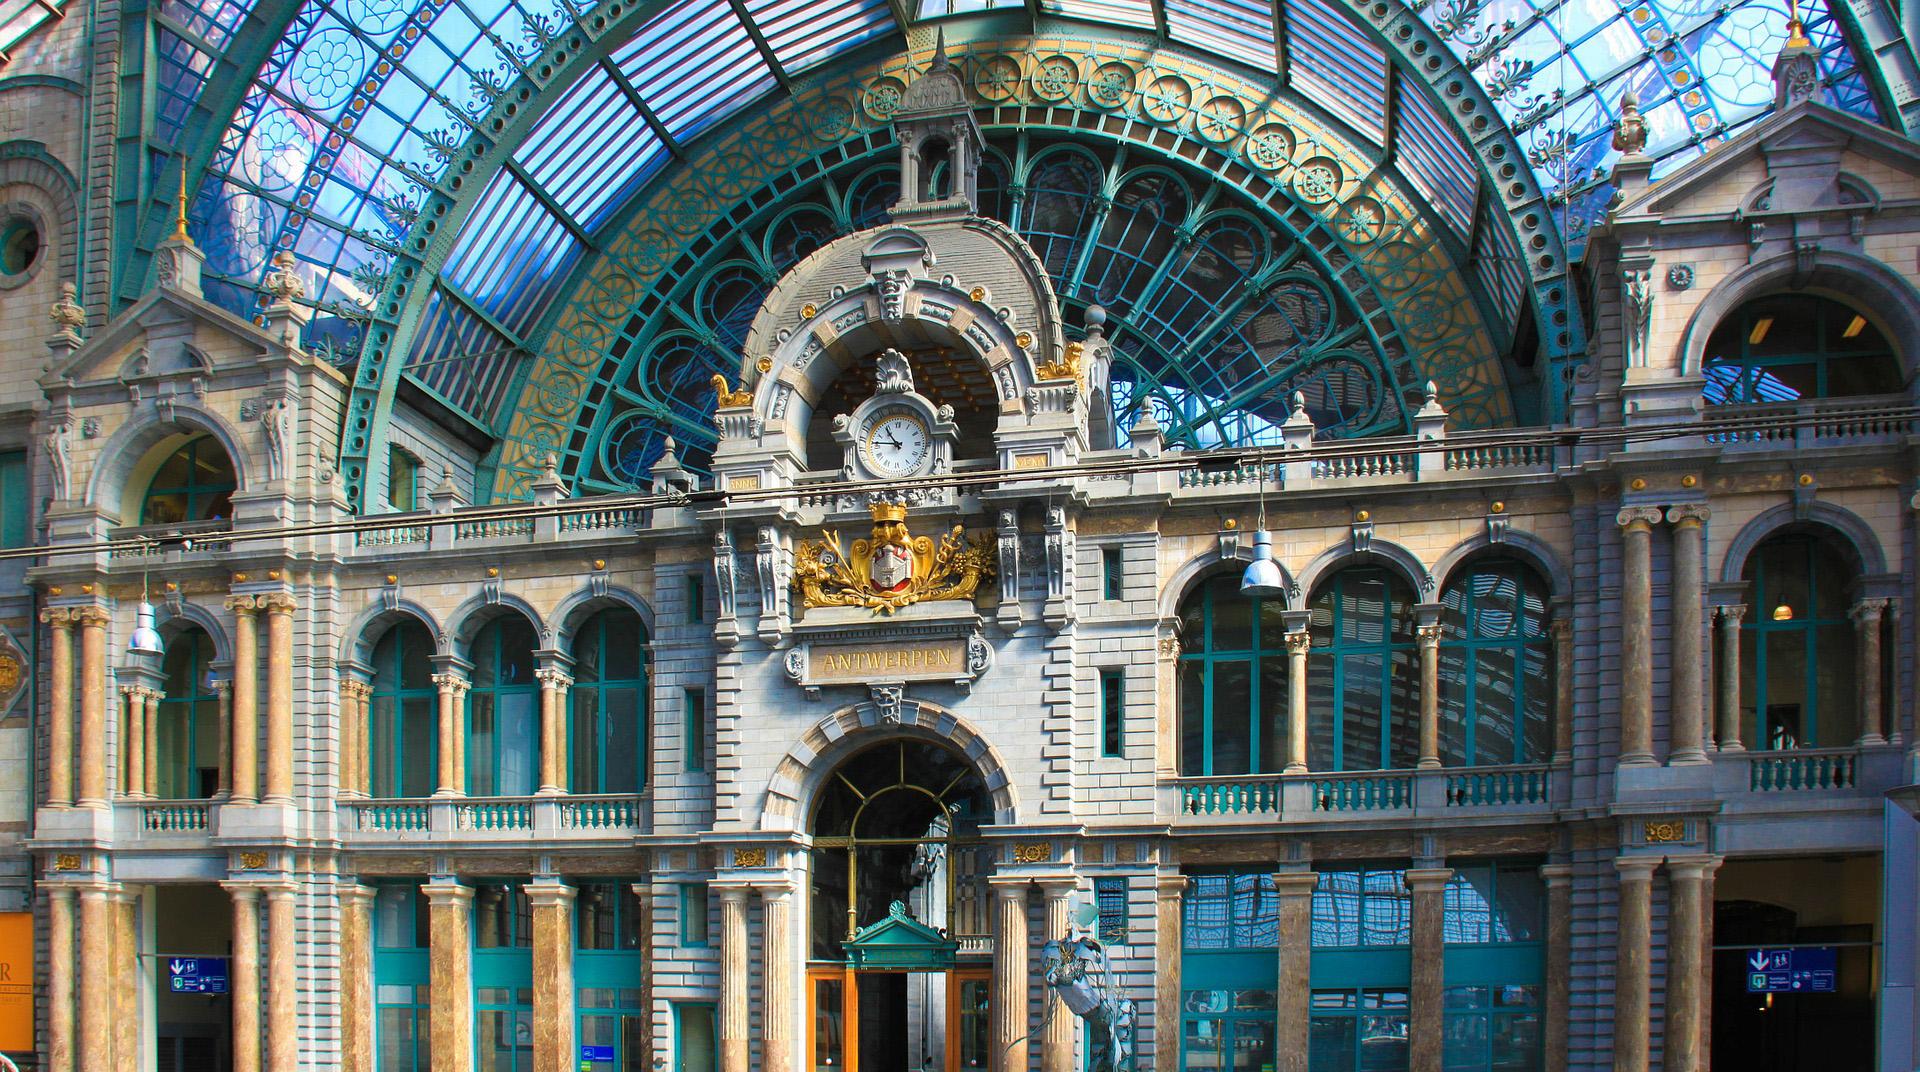 An Afternoon in Antwerp's Historic Diamond District - - Centraal station Antwerp